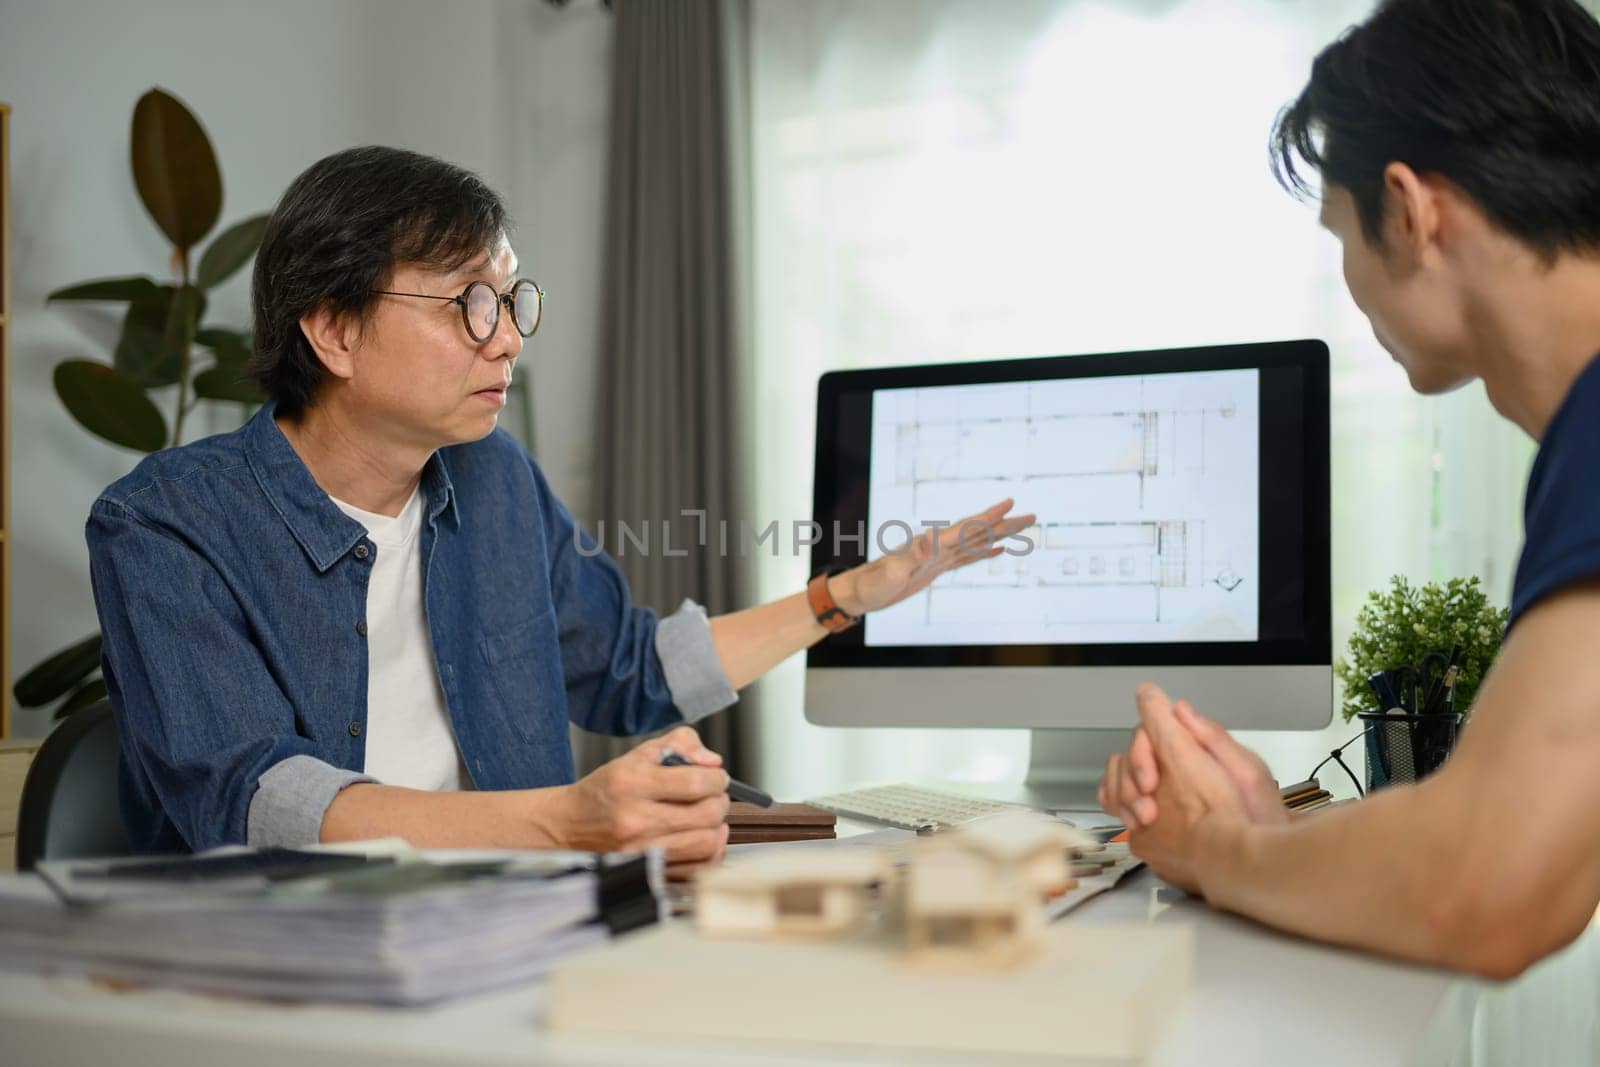 Professional interior designer sharing ideas and showing architectural plan to male client by prathanchorruangsak